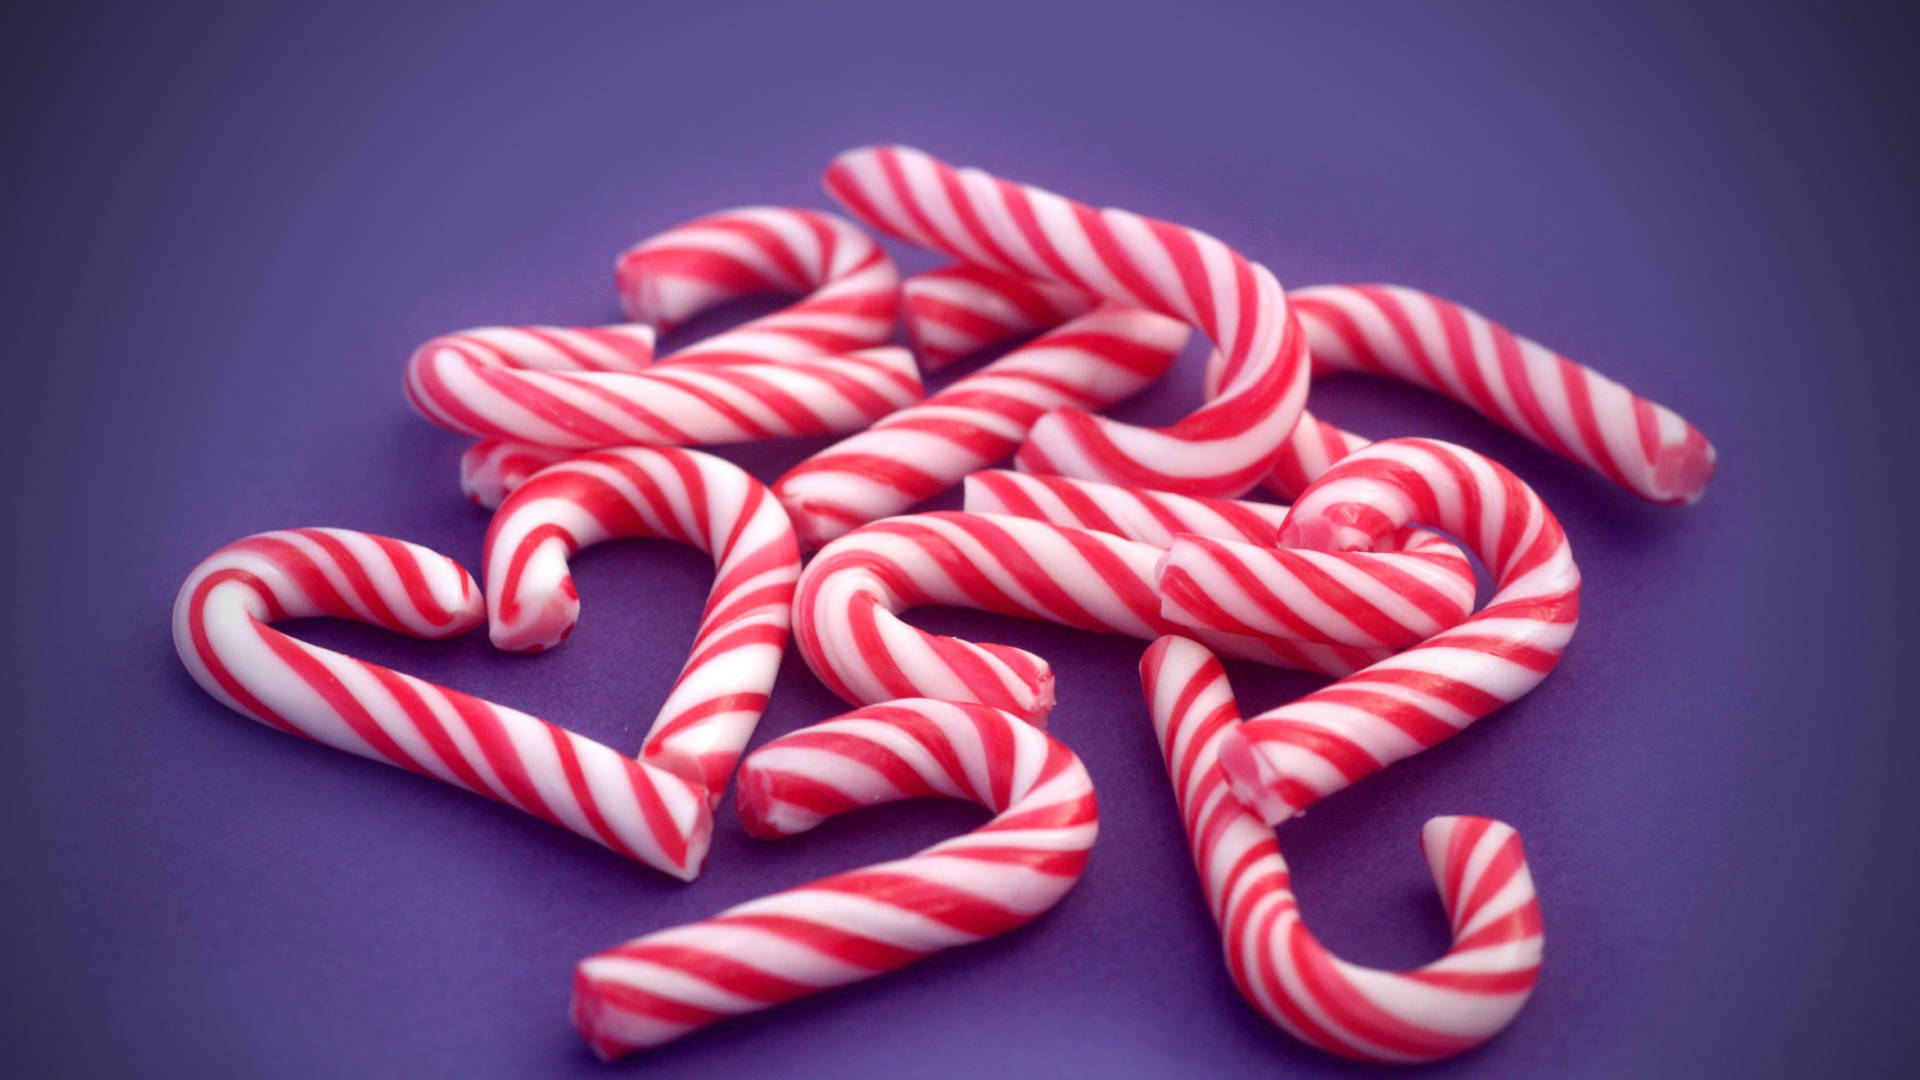 Candy Cane Wallpaper Images